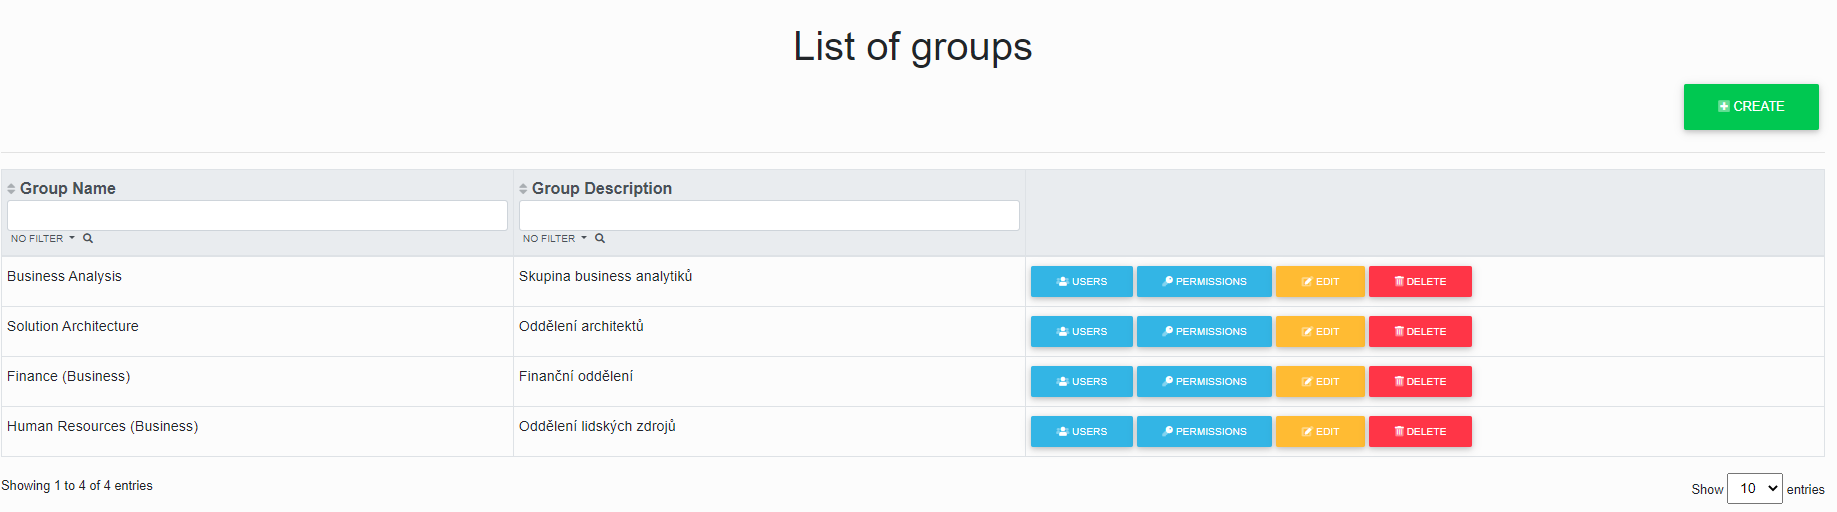 lists of group.png